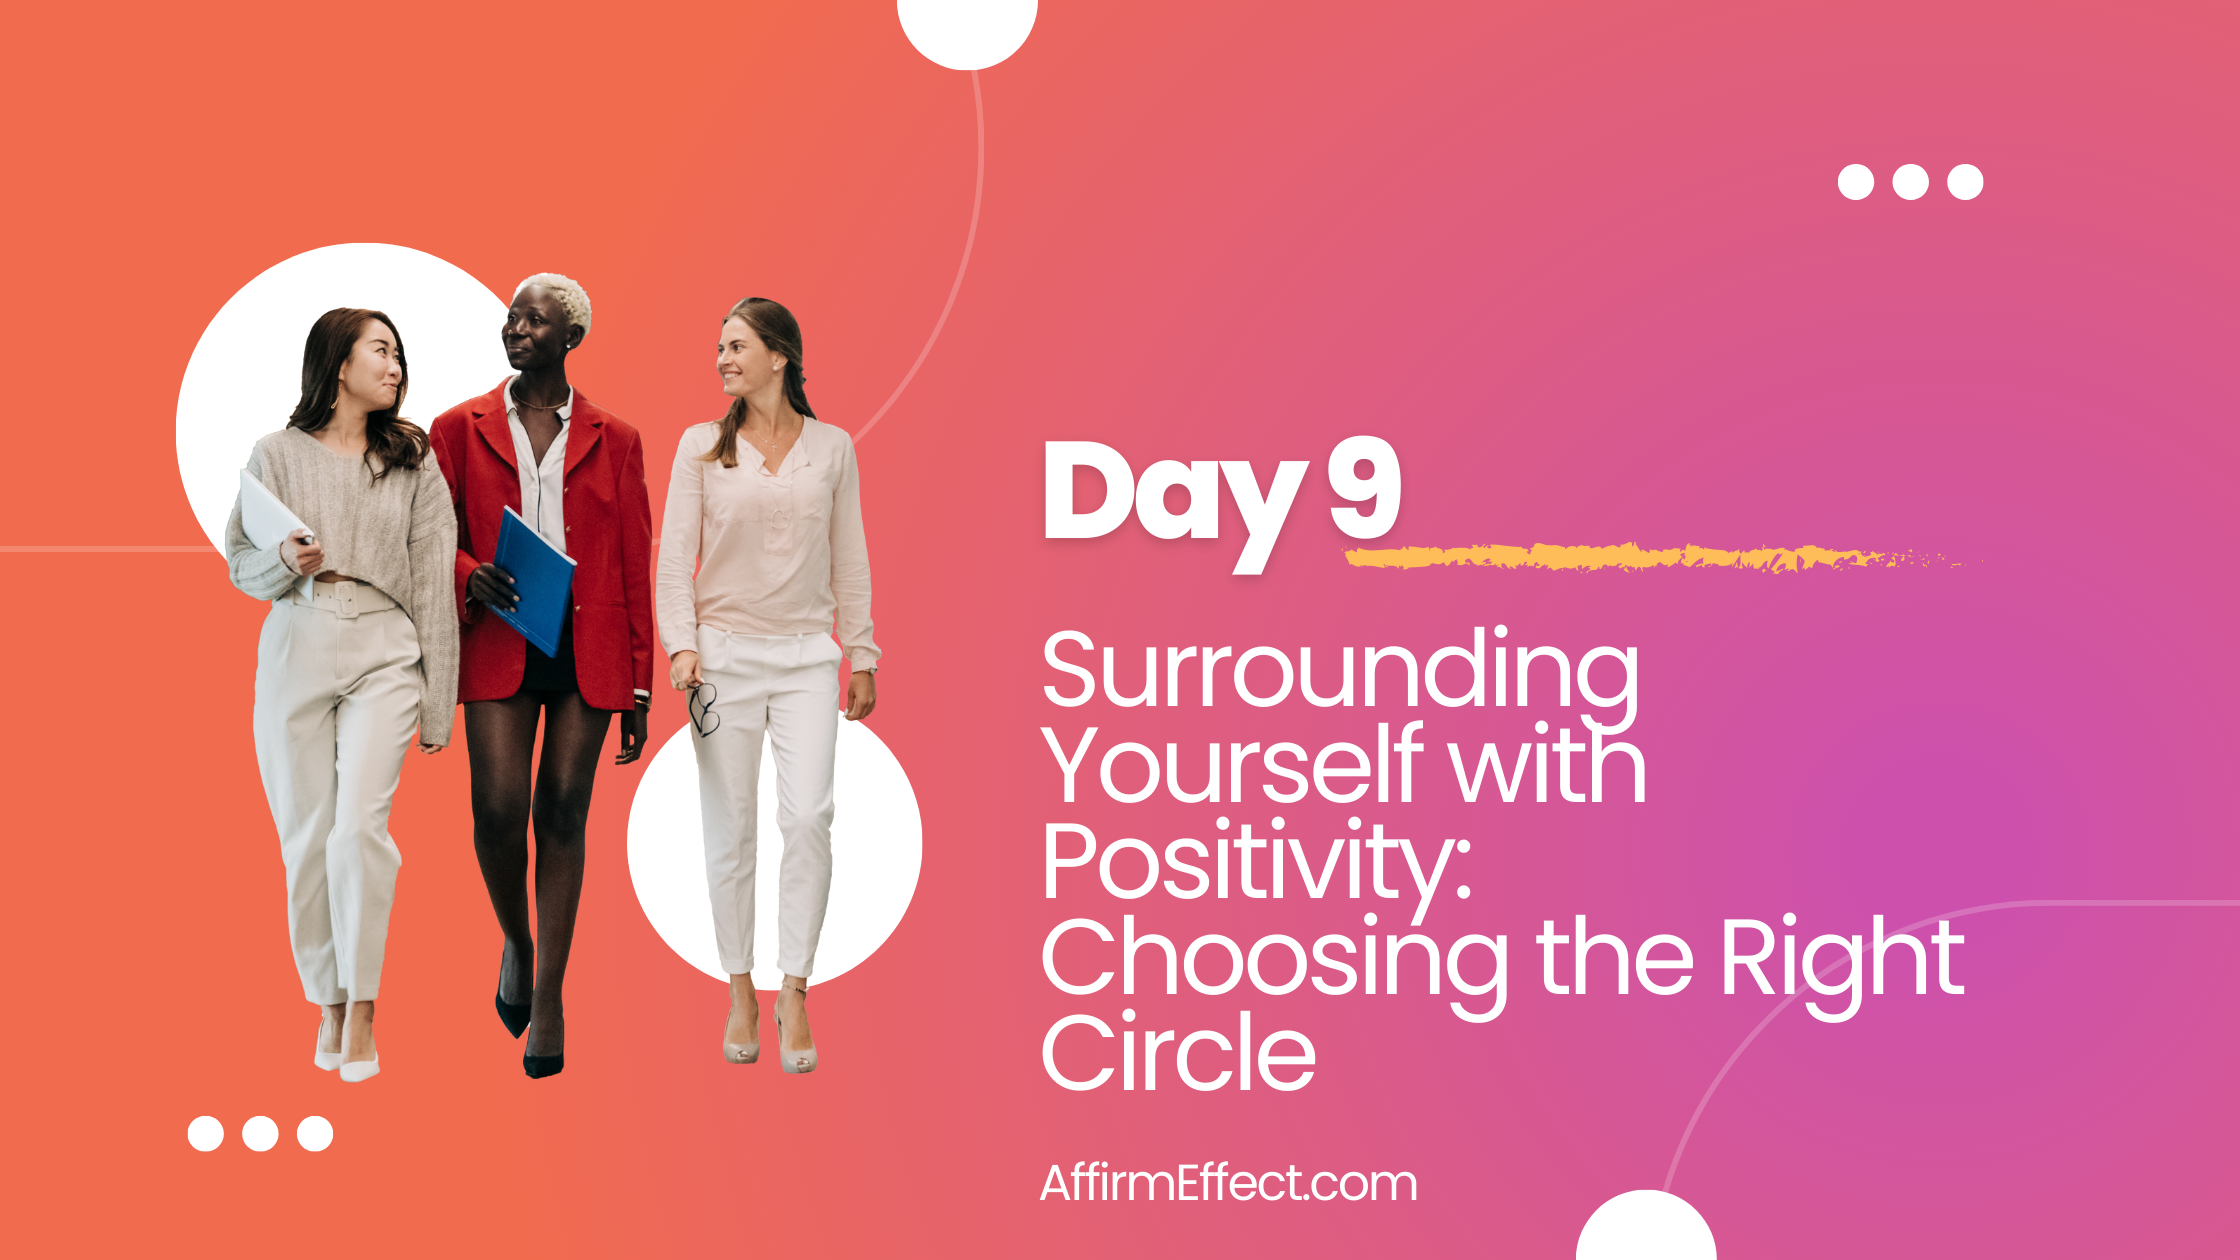 Day 9: Surrounding Yourself with Positivity: Choosing the Right Circle